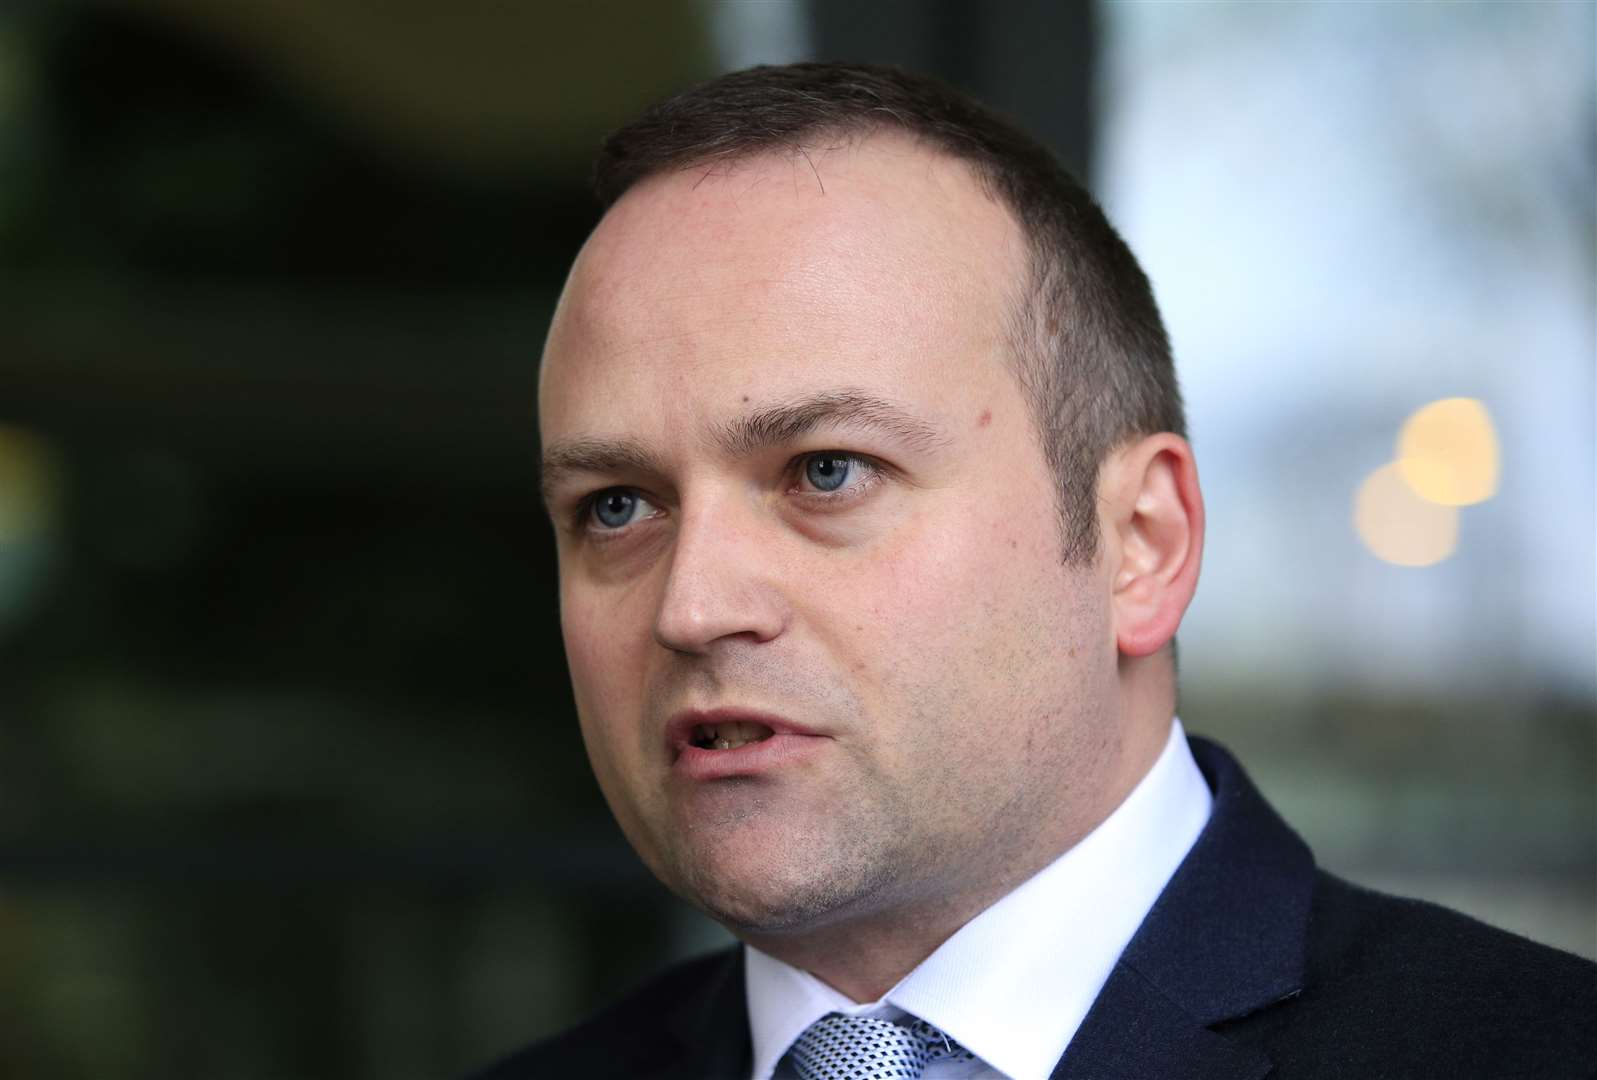 Neil Coyle lost the Labour whip following allegations he made racist comments to a journalist in a parliamentary bar. (Jonathan Brady/PA)